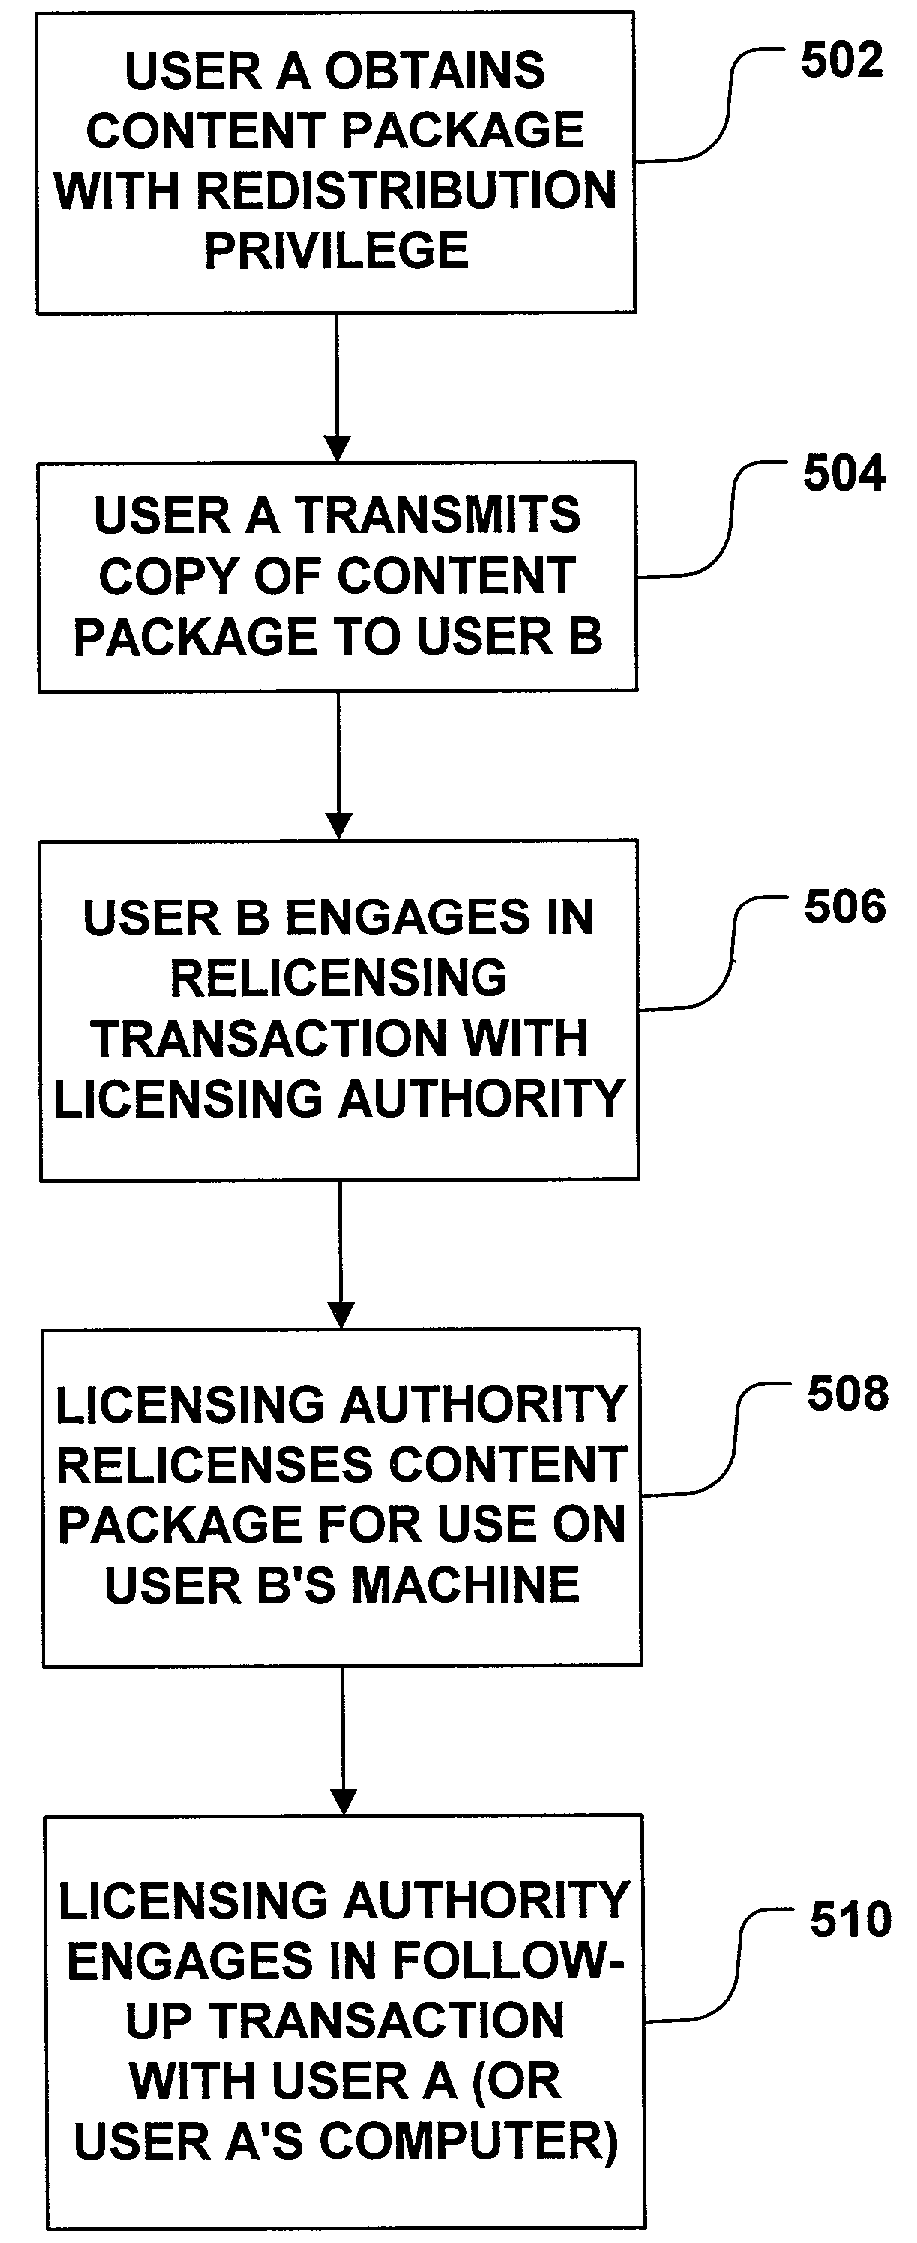 Redistribution of rights-managed content